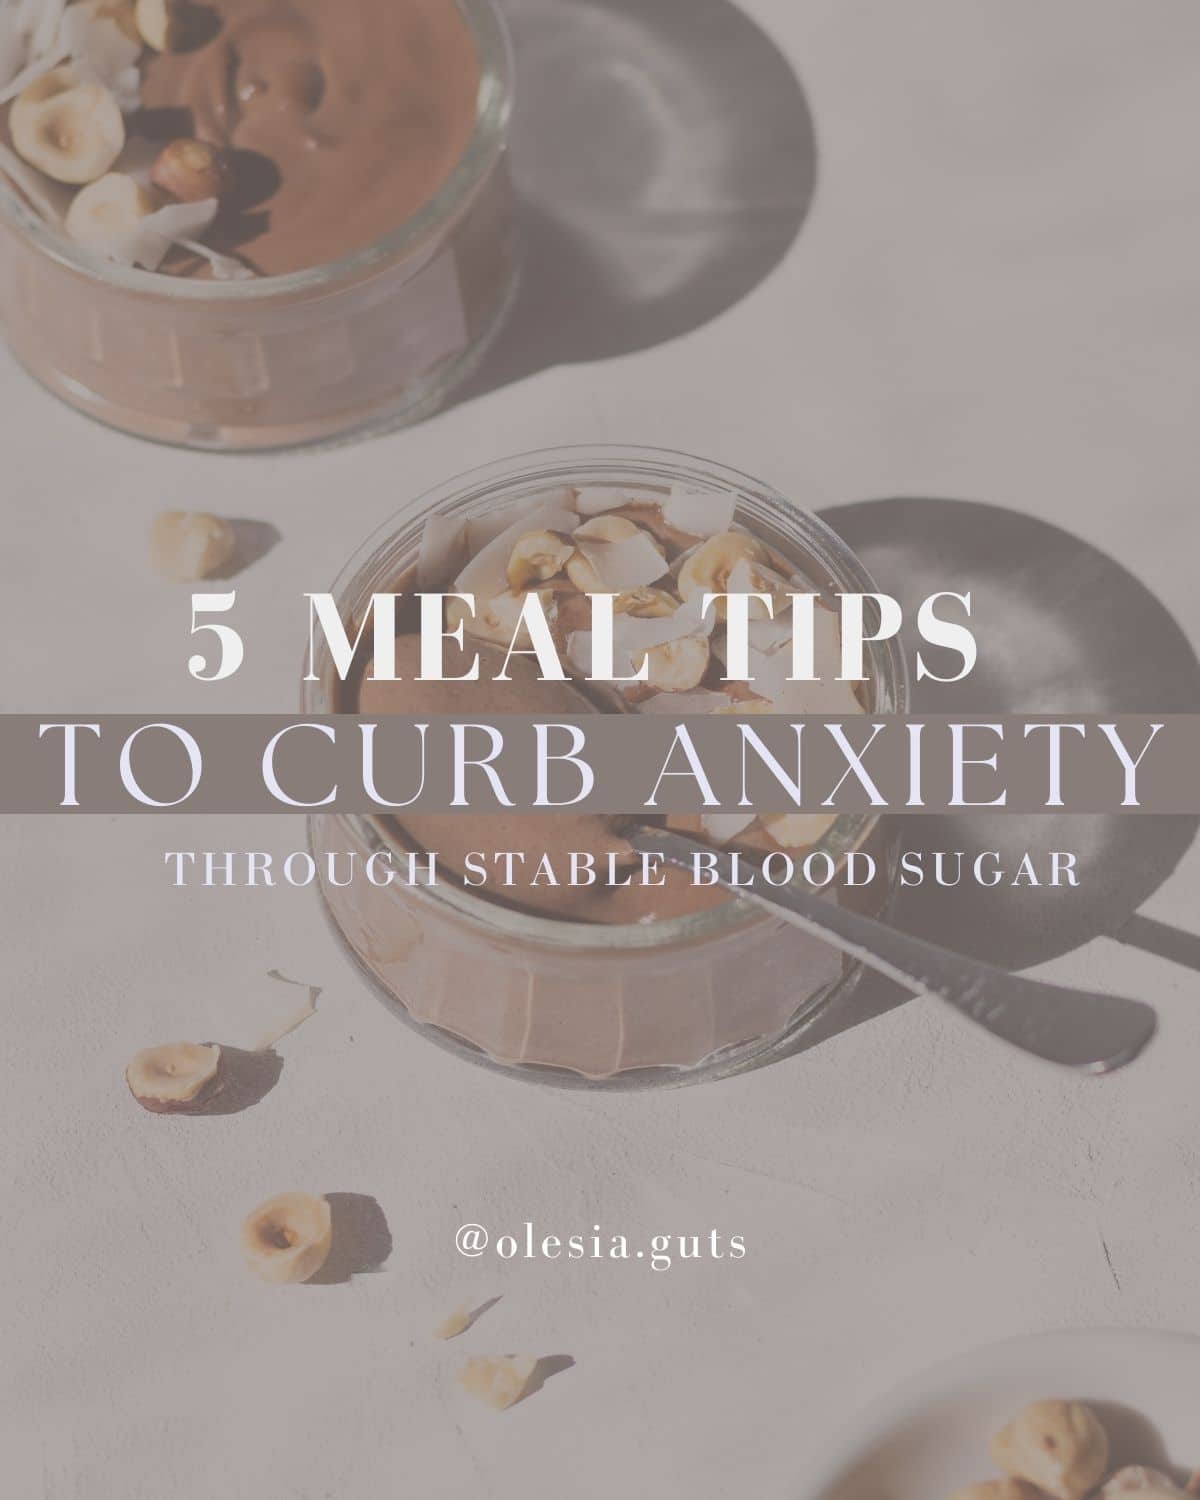 Five meal tips for stable blood sugar (and reducing anxiety!)